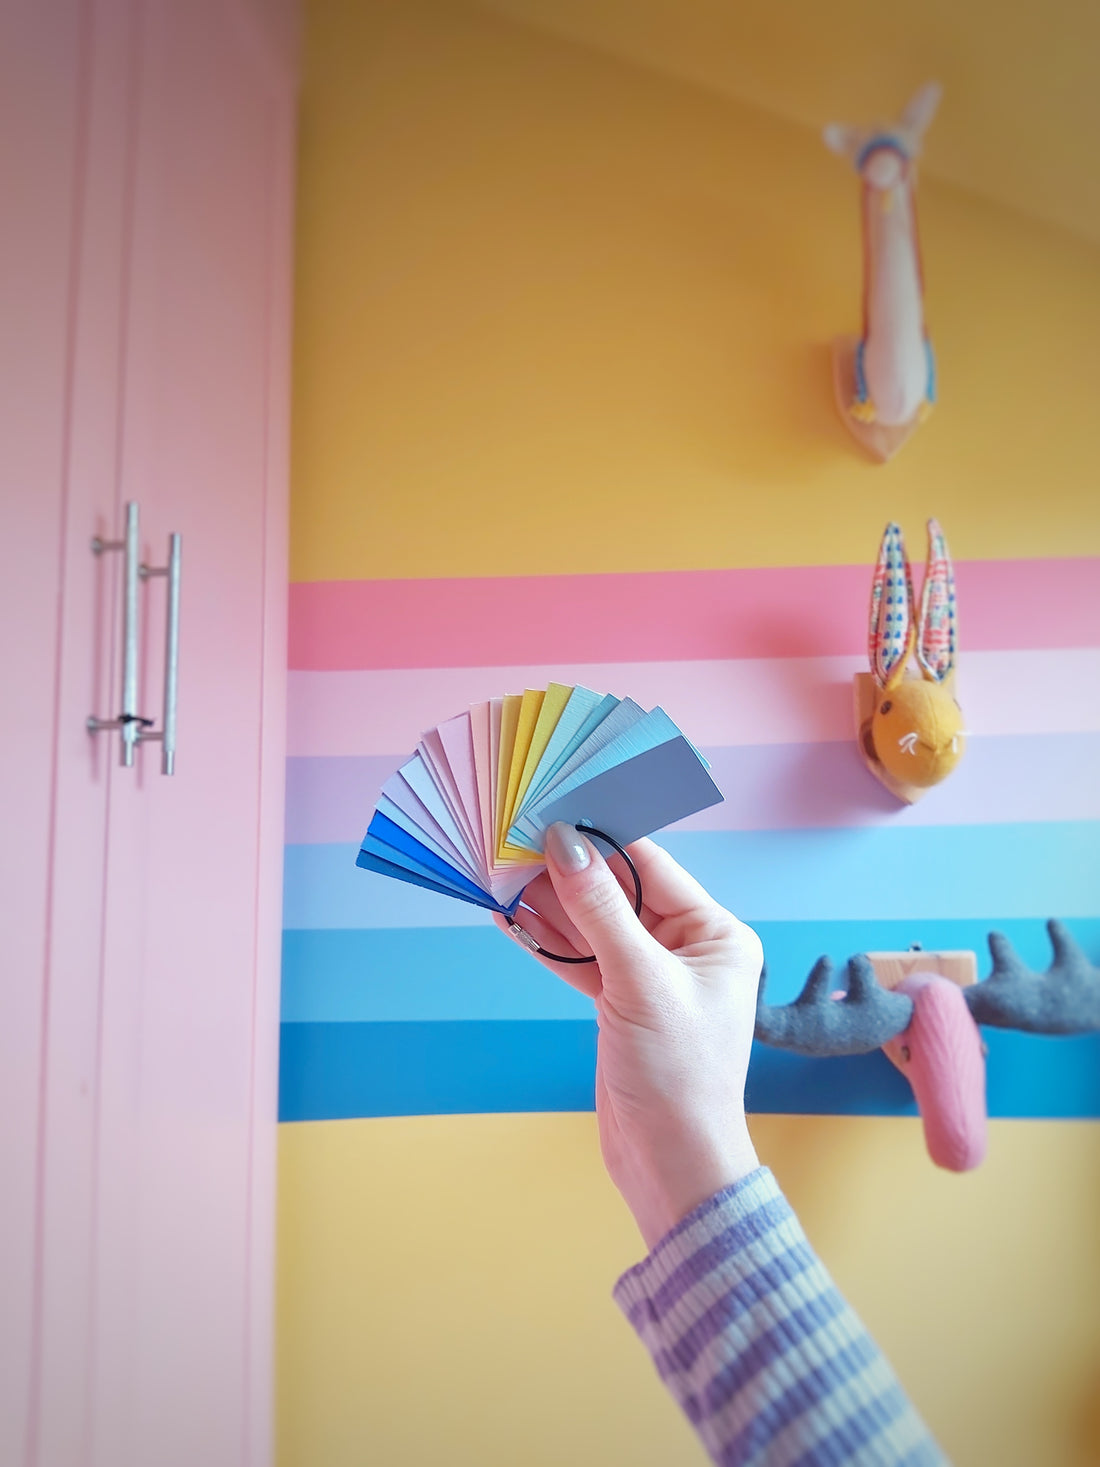 Top 3 paint colours for an inspiring playroom